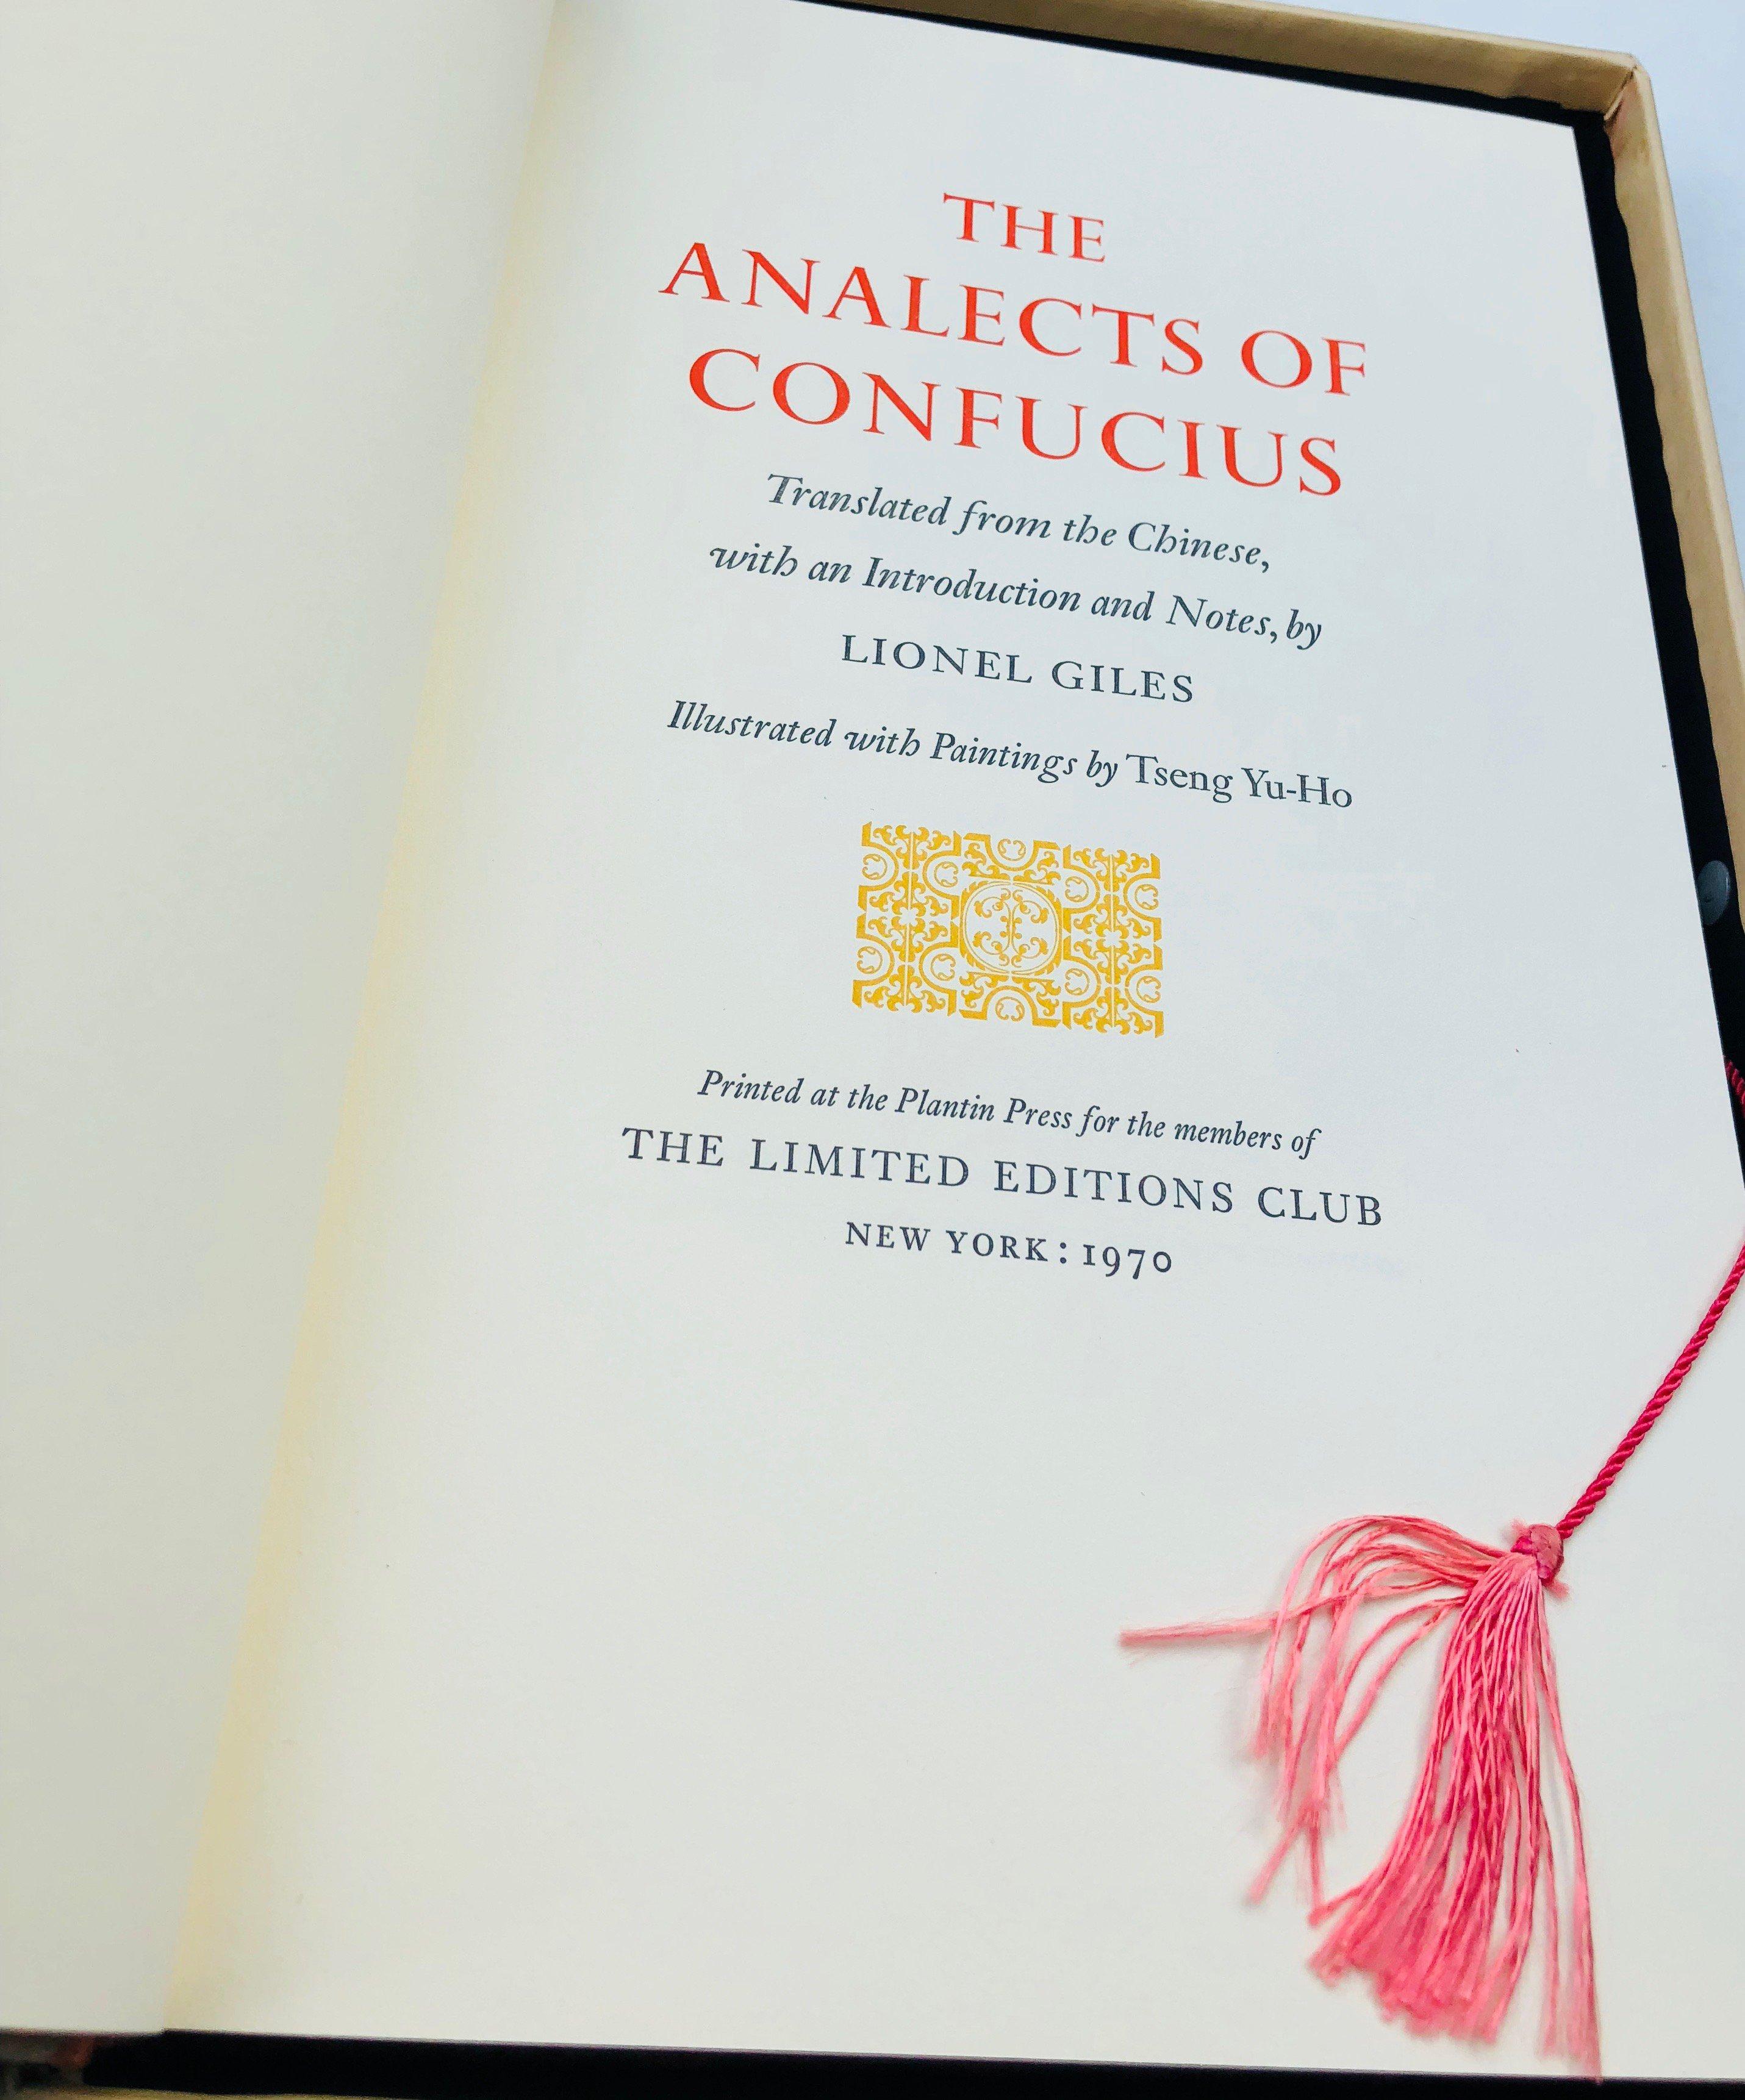 The Analects of Confucius by Lionel Giles Confucius (1970) LIMITED #993/1500 With Clamshell Box